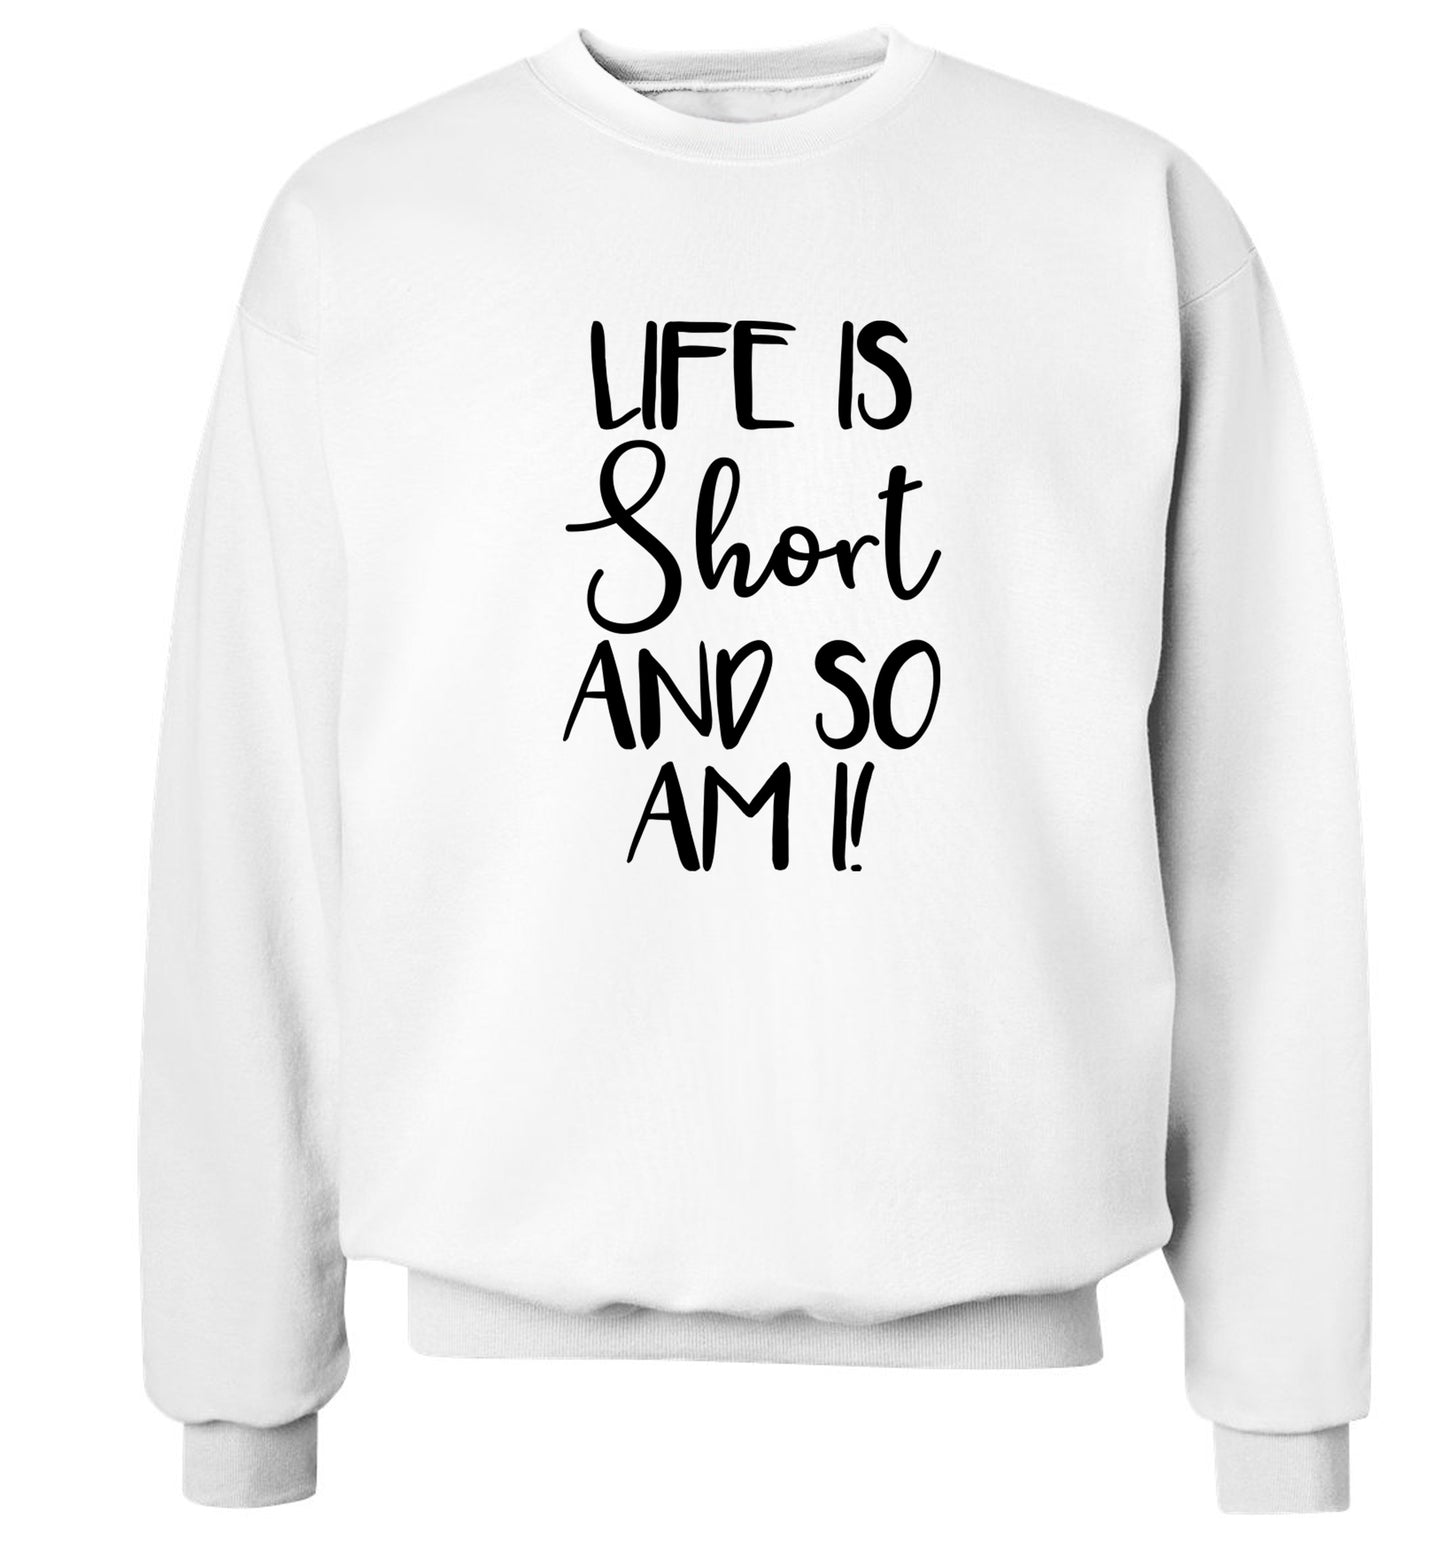 Life is short and so am I! Adult's unisex white Sweater 2XL